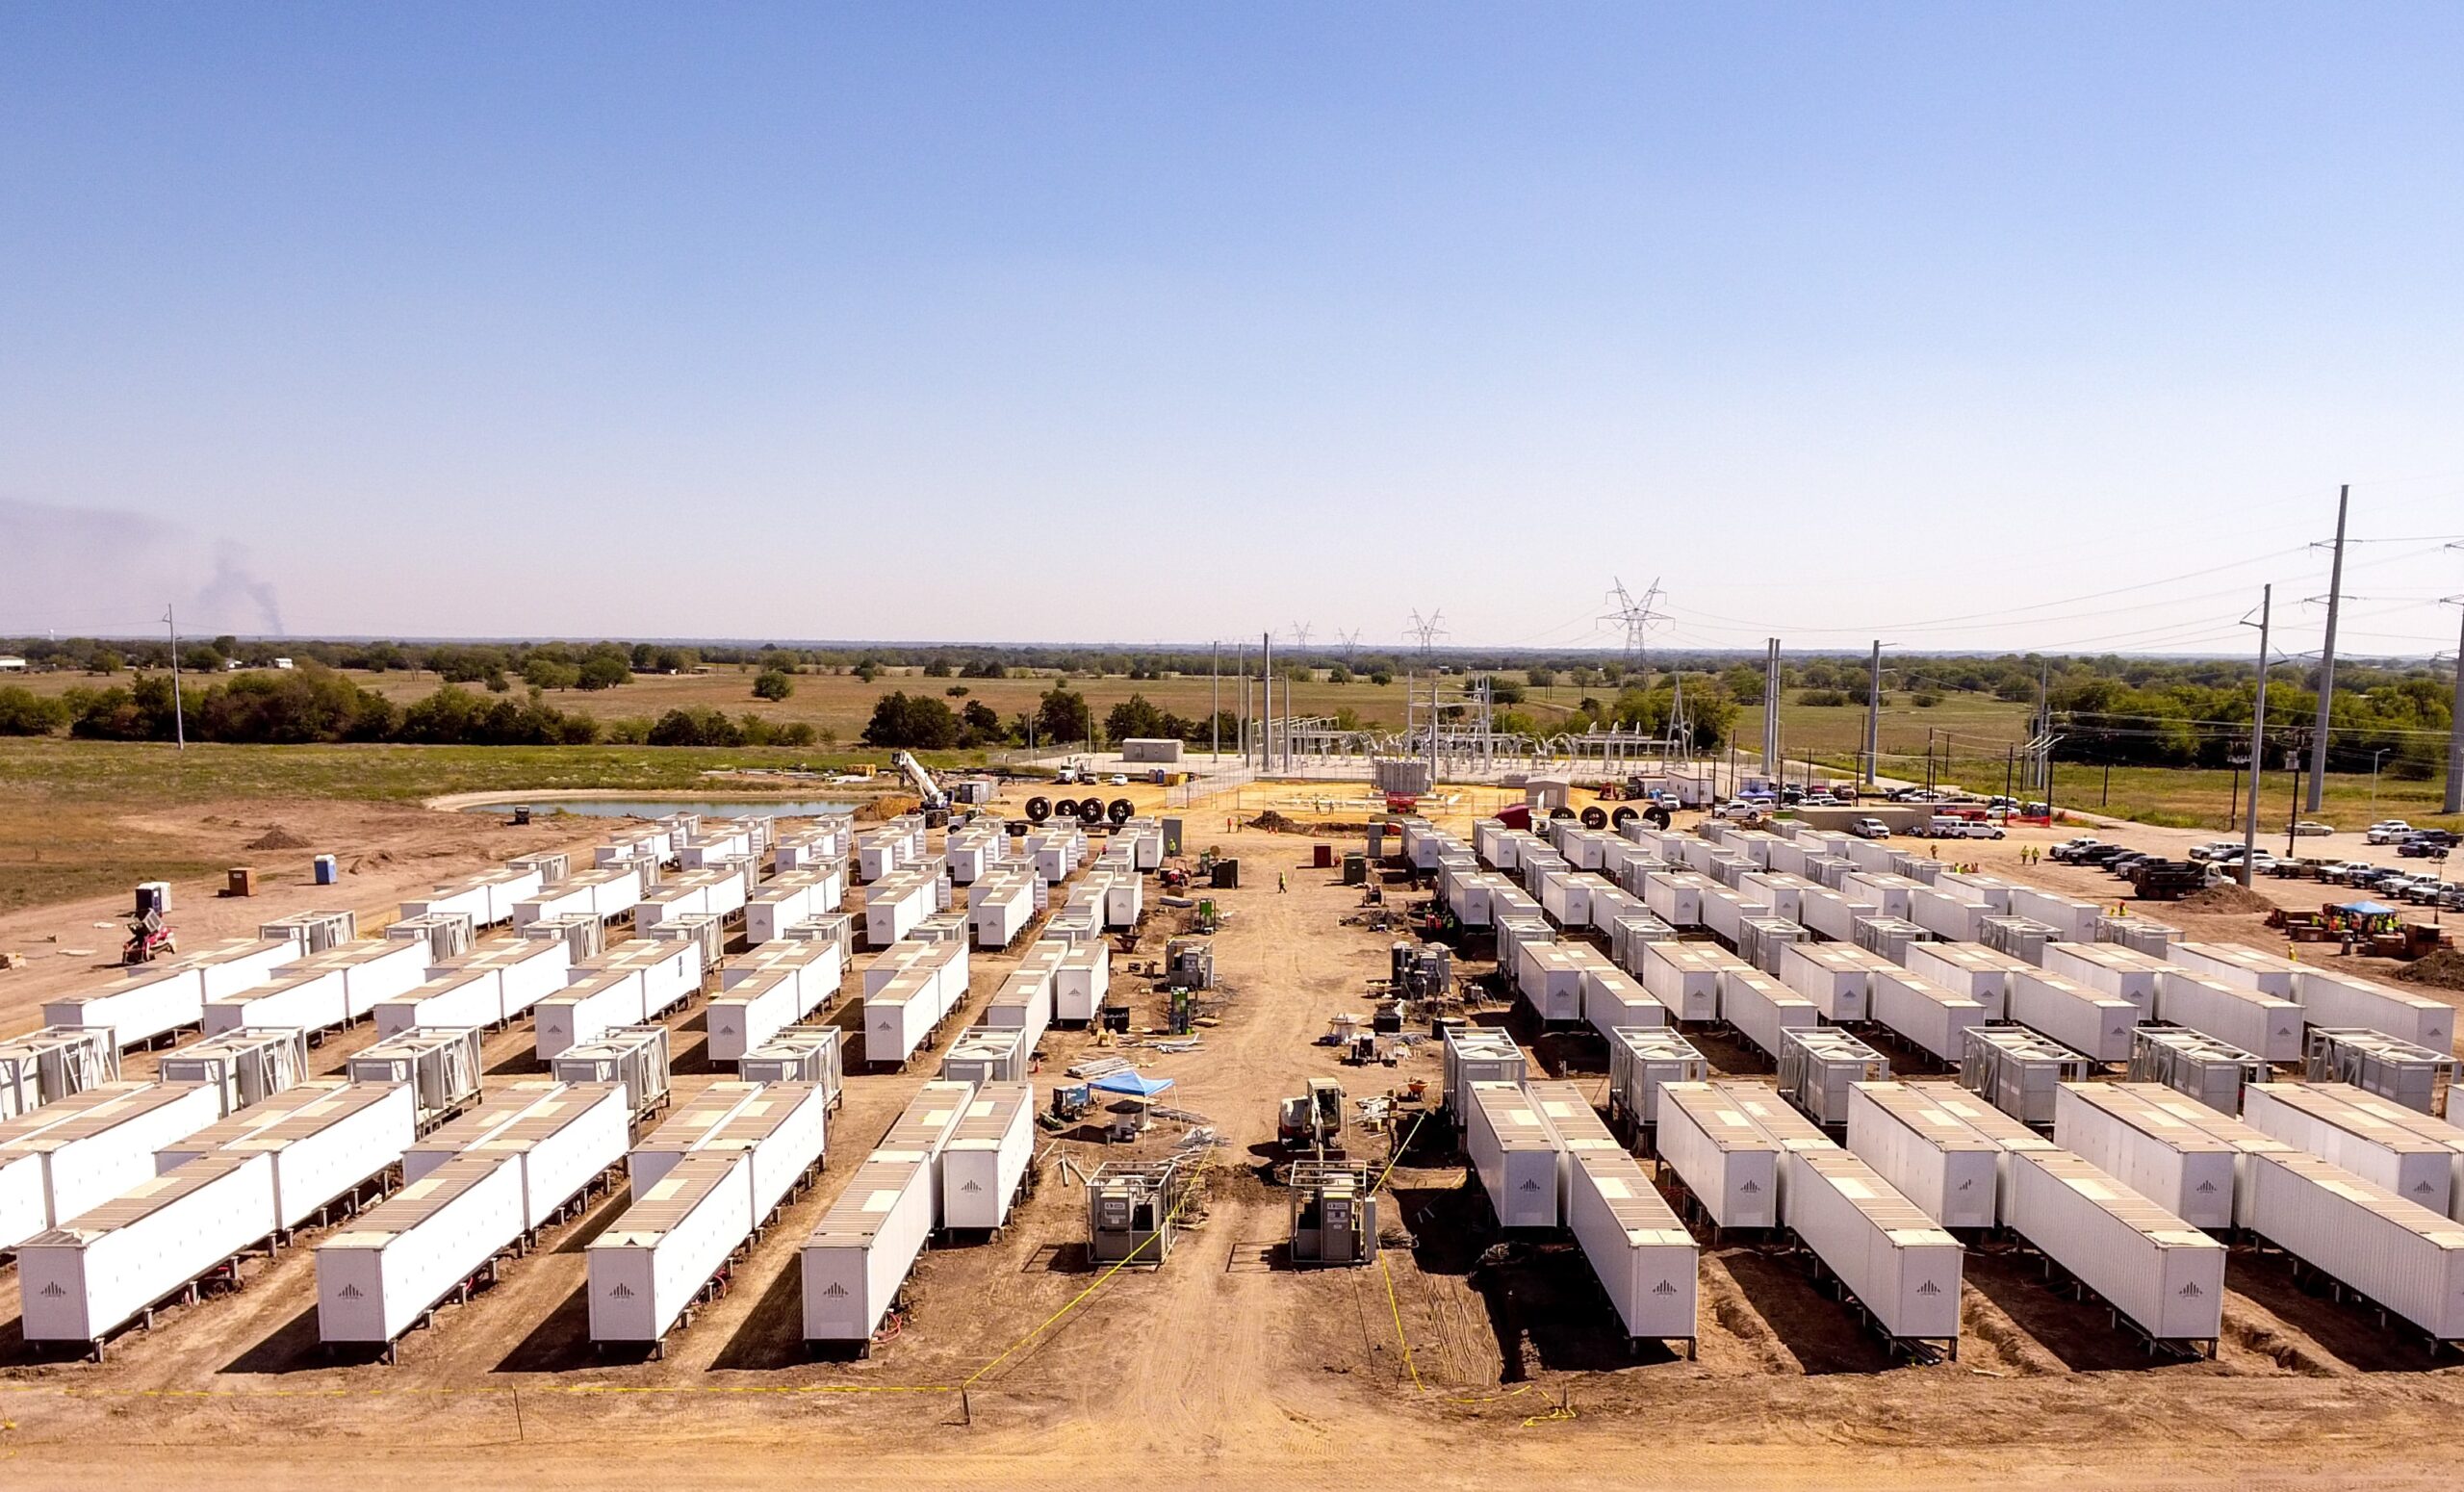 ACCIONA ENERGÍA ACQUIRES LARGEST BATTERY STORAGE PROJECT IN TEXAS (190MW) AND 1GW OF BESS PIPELINE